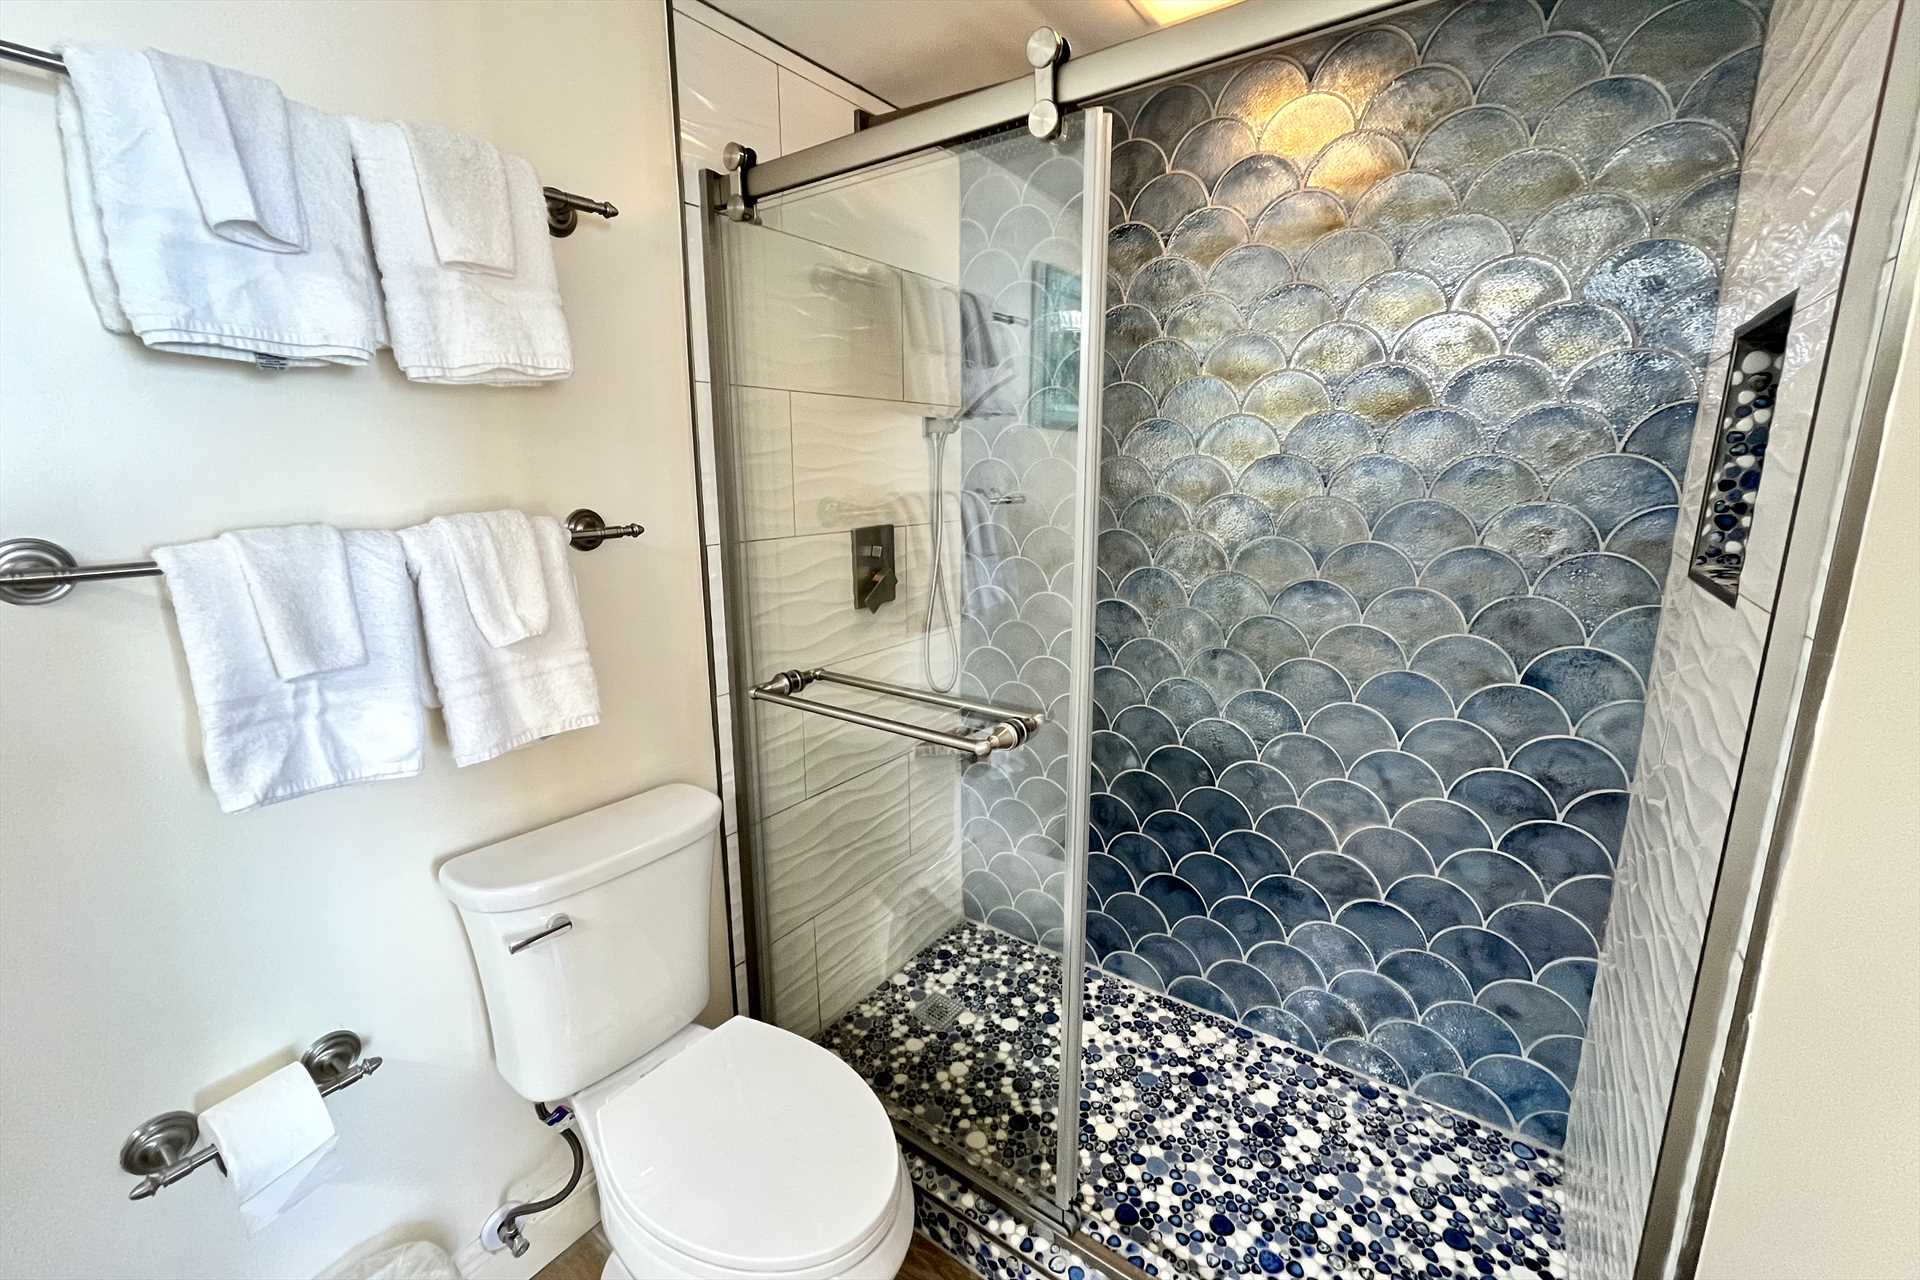 The master bathroom with a custom tiled shower.  How unique!